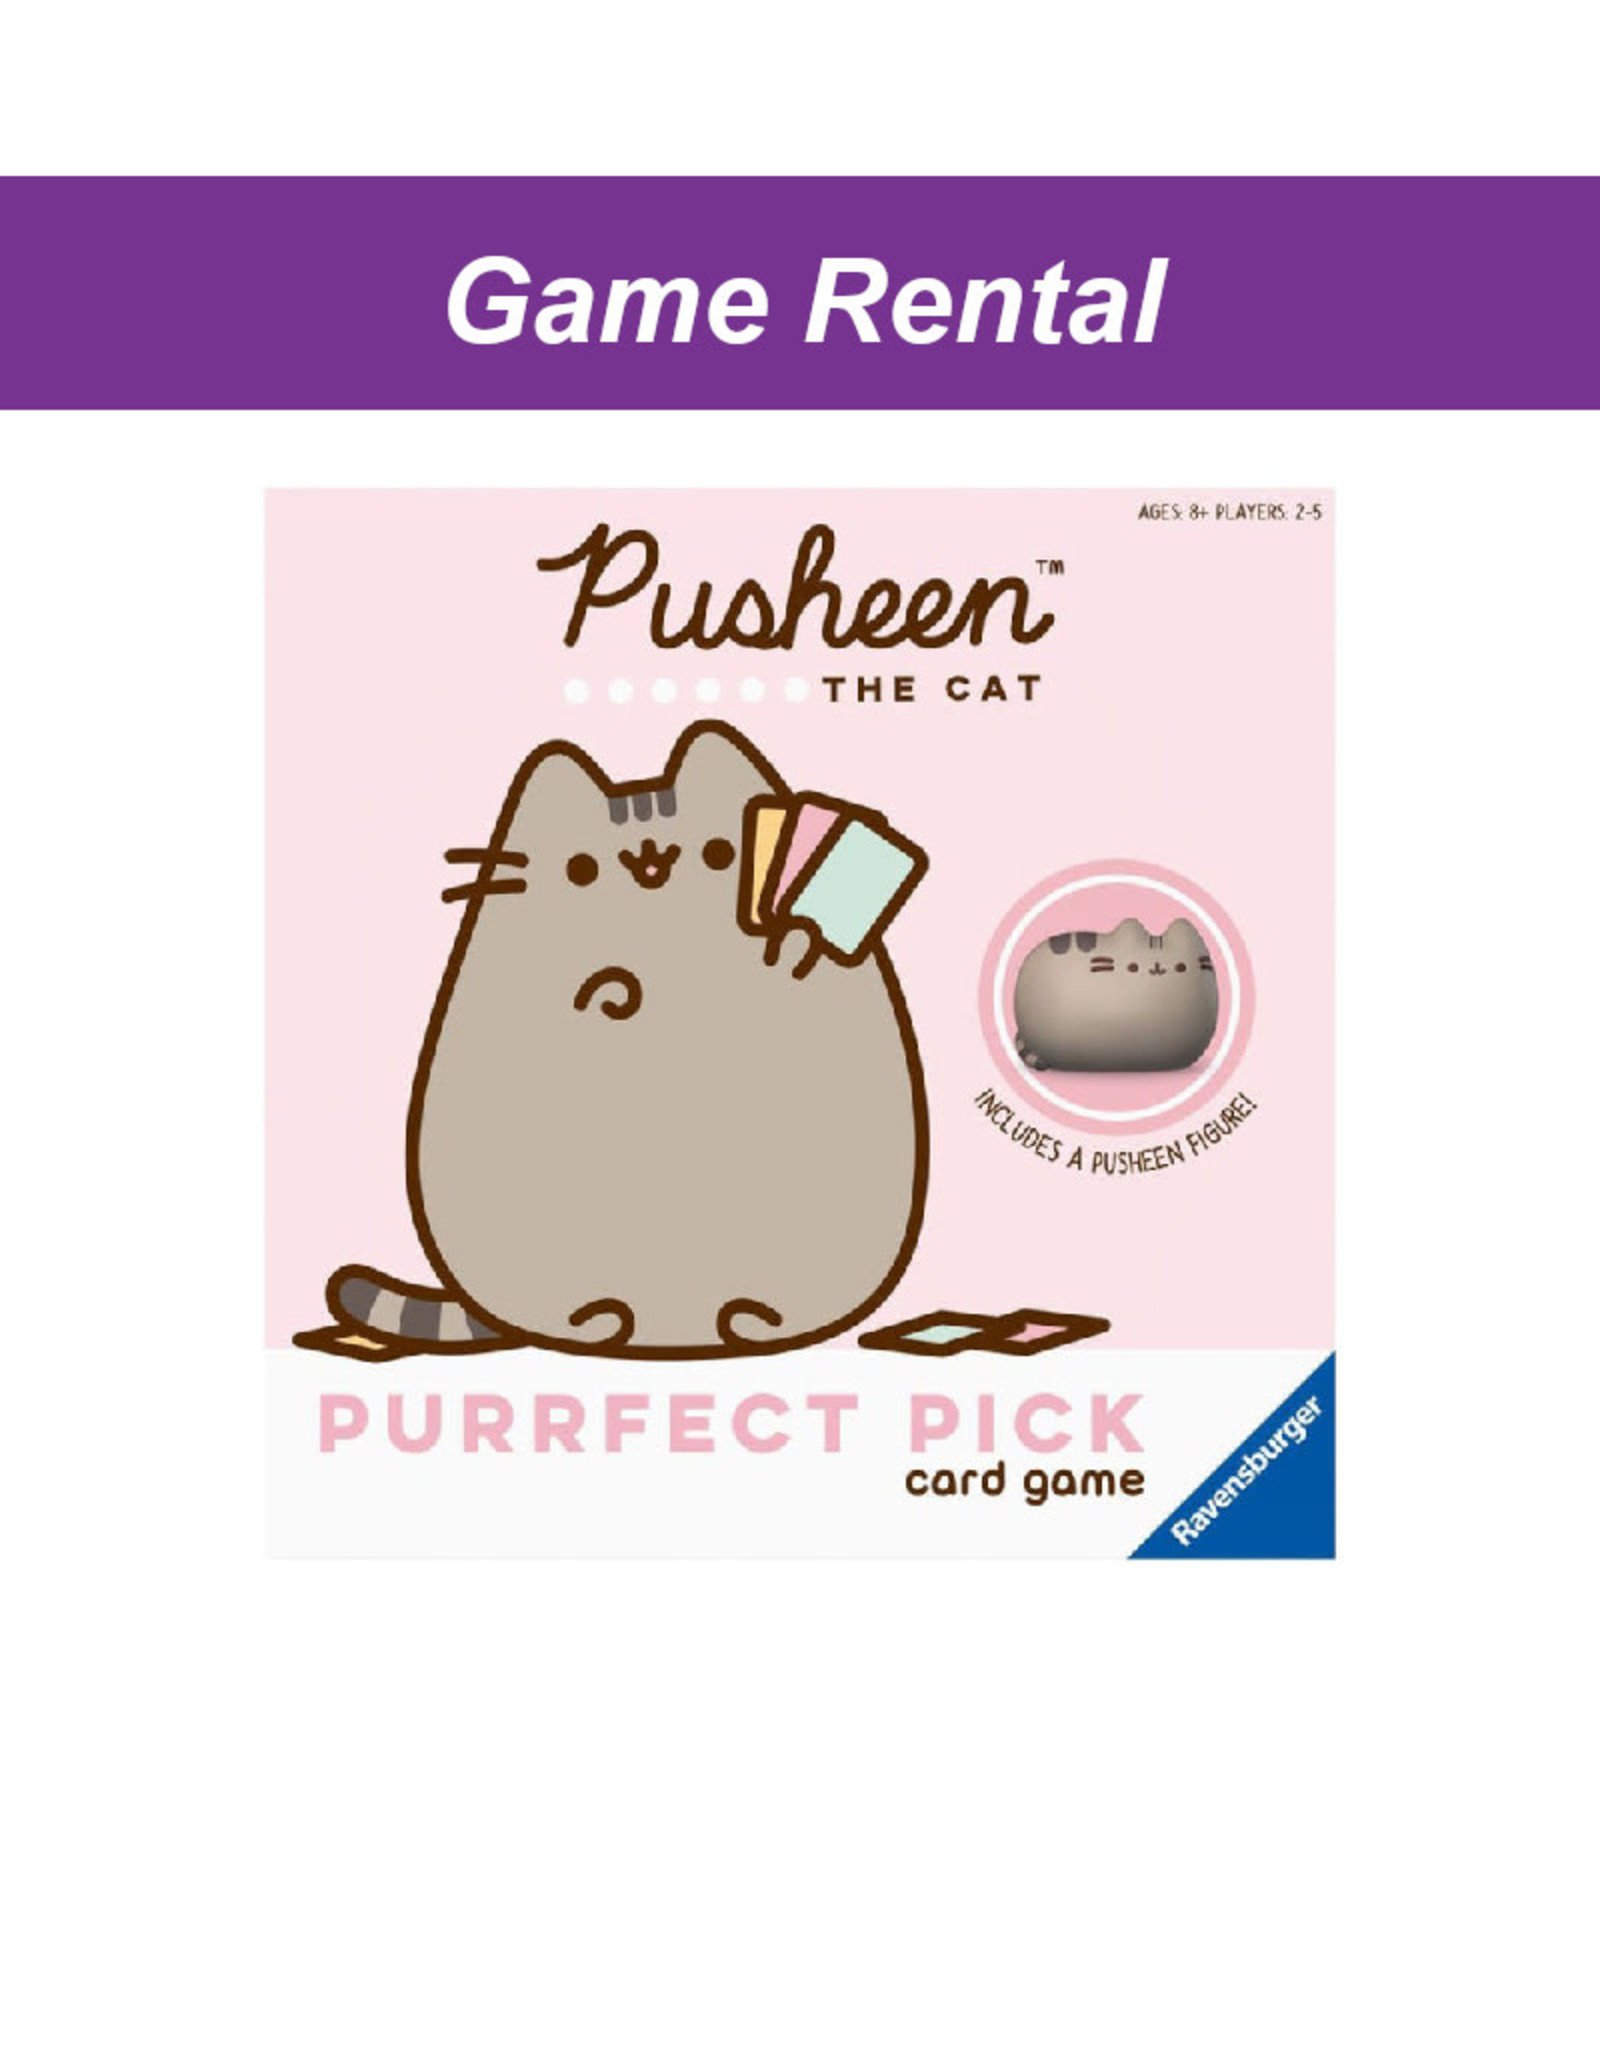 Ravensburger (RENT) Pusheen Card Game For a Day. Love It! Buy It!